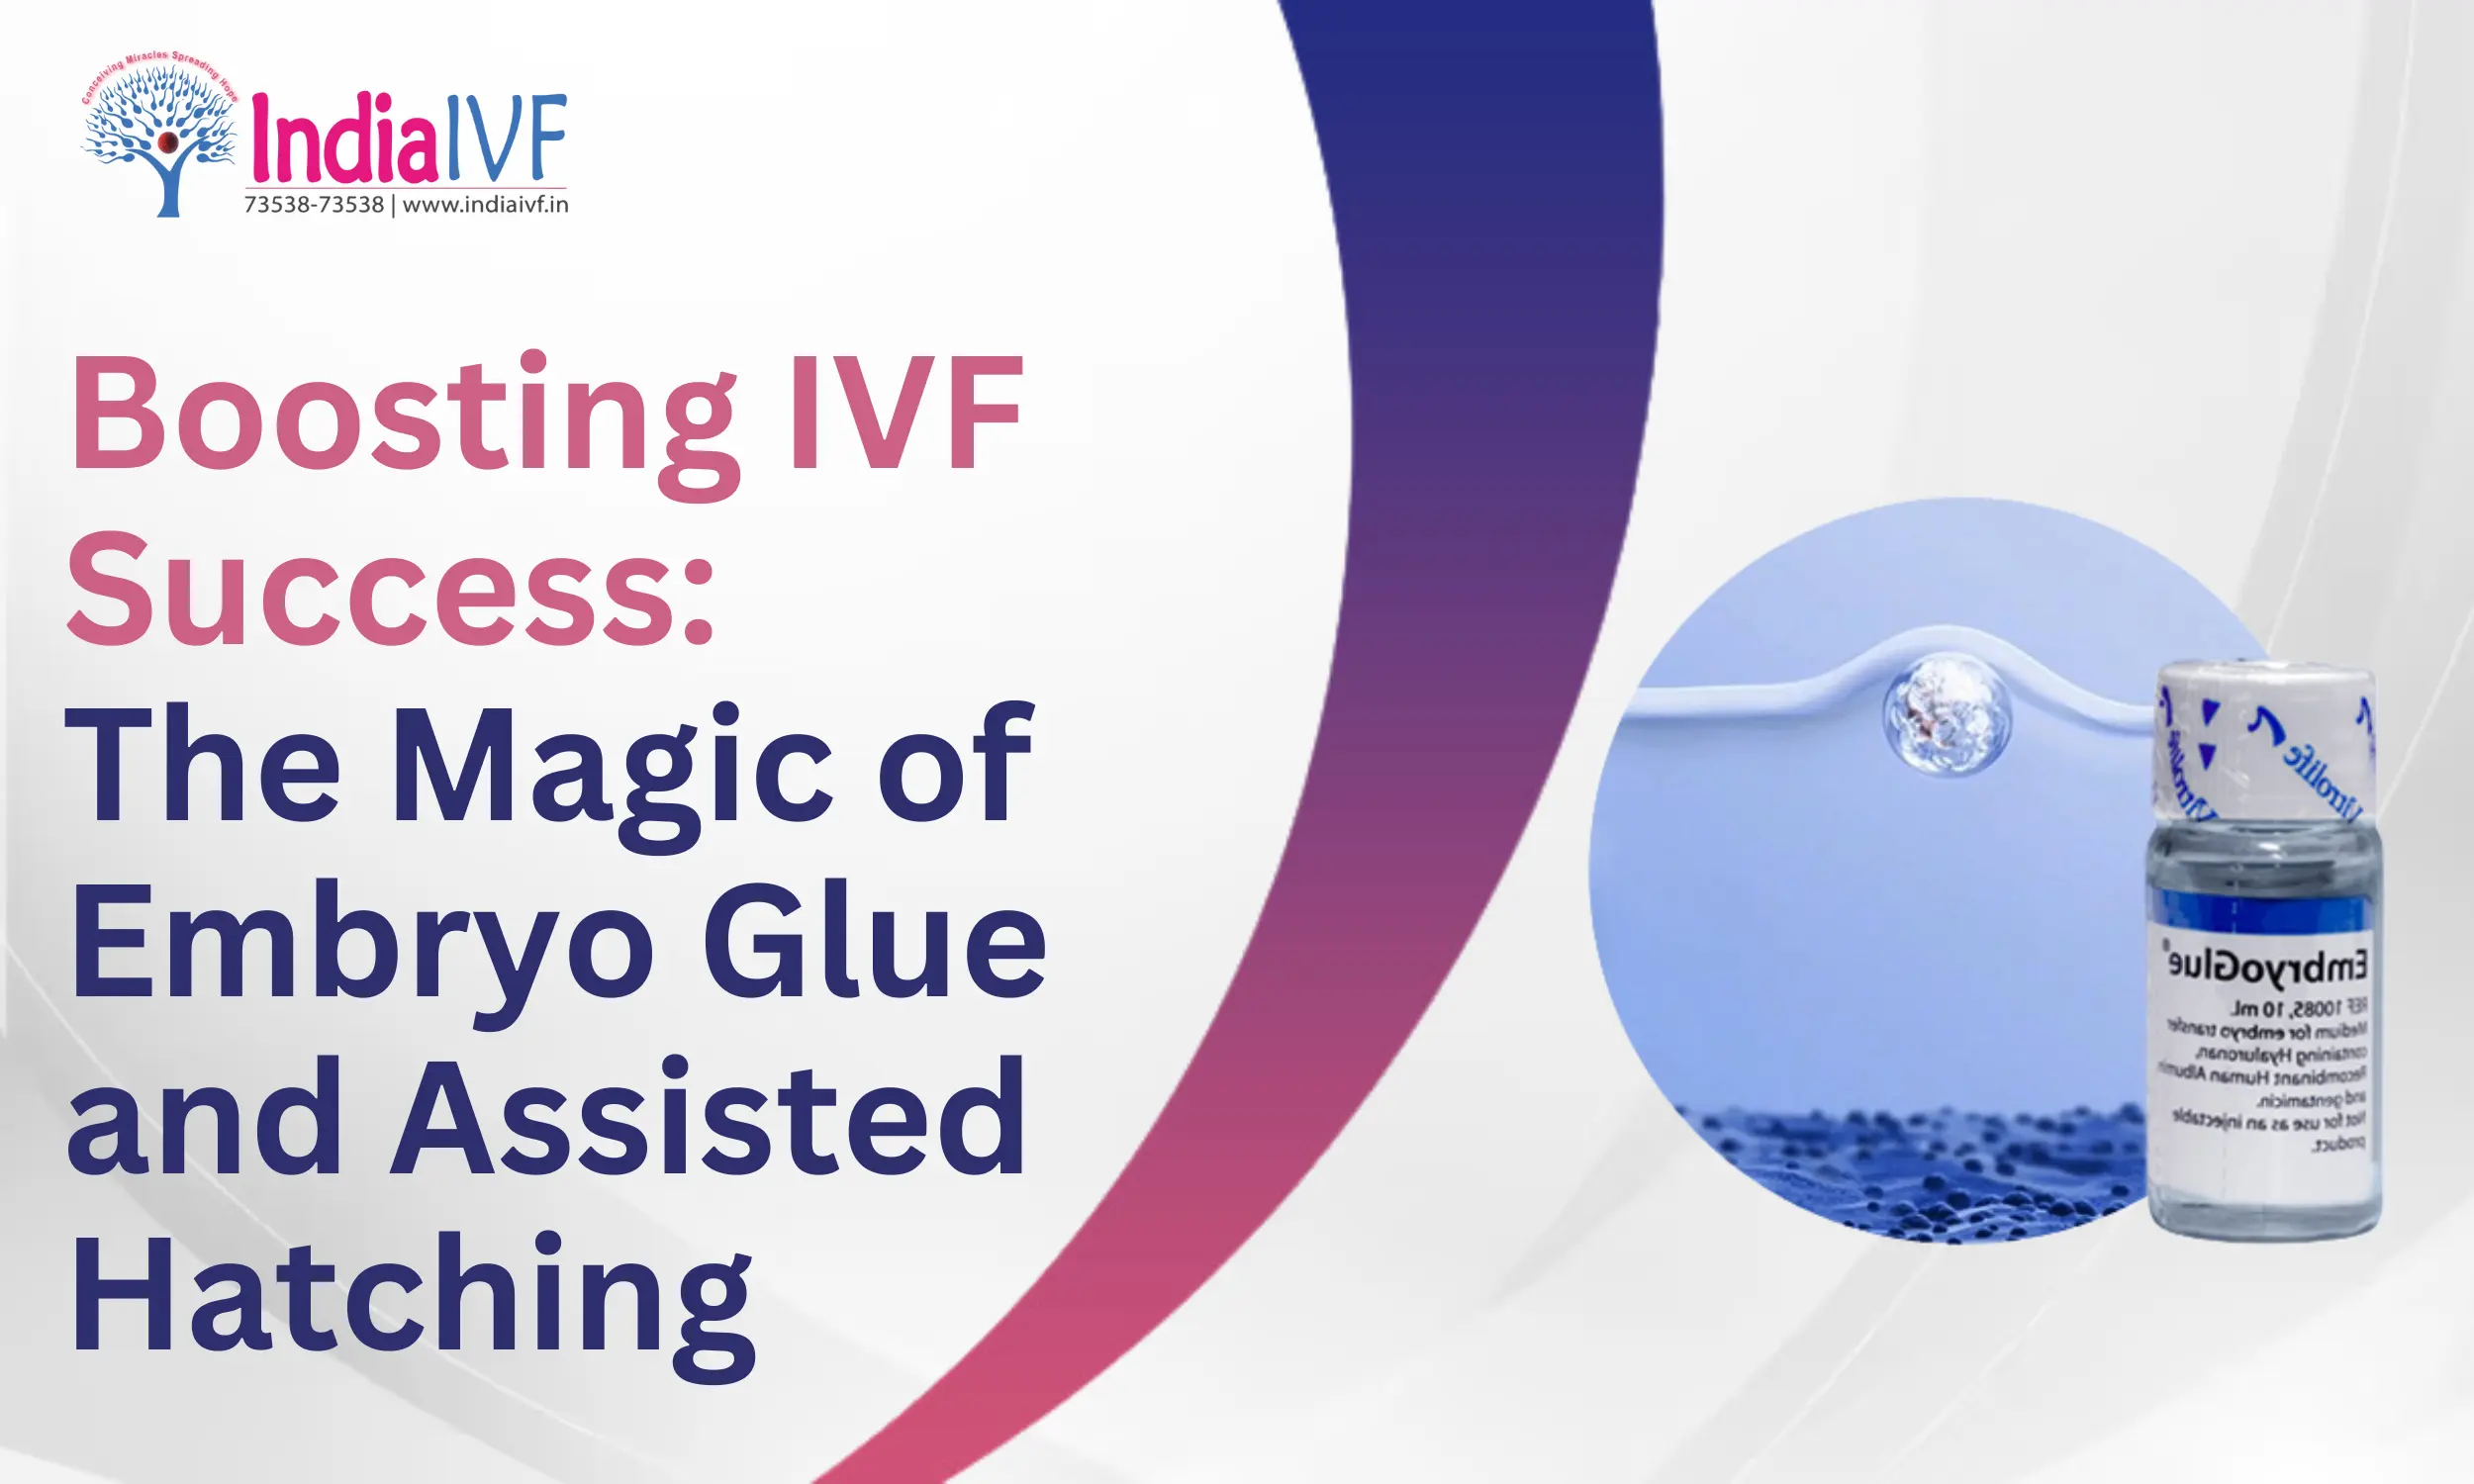 Boosting IVF Success: The Magic of Embryo Glue and Assisted Hatching